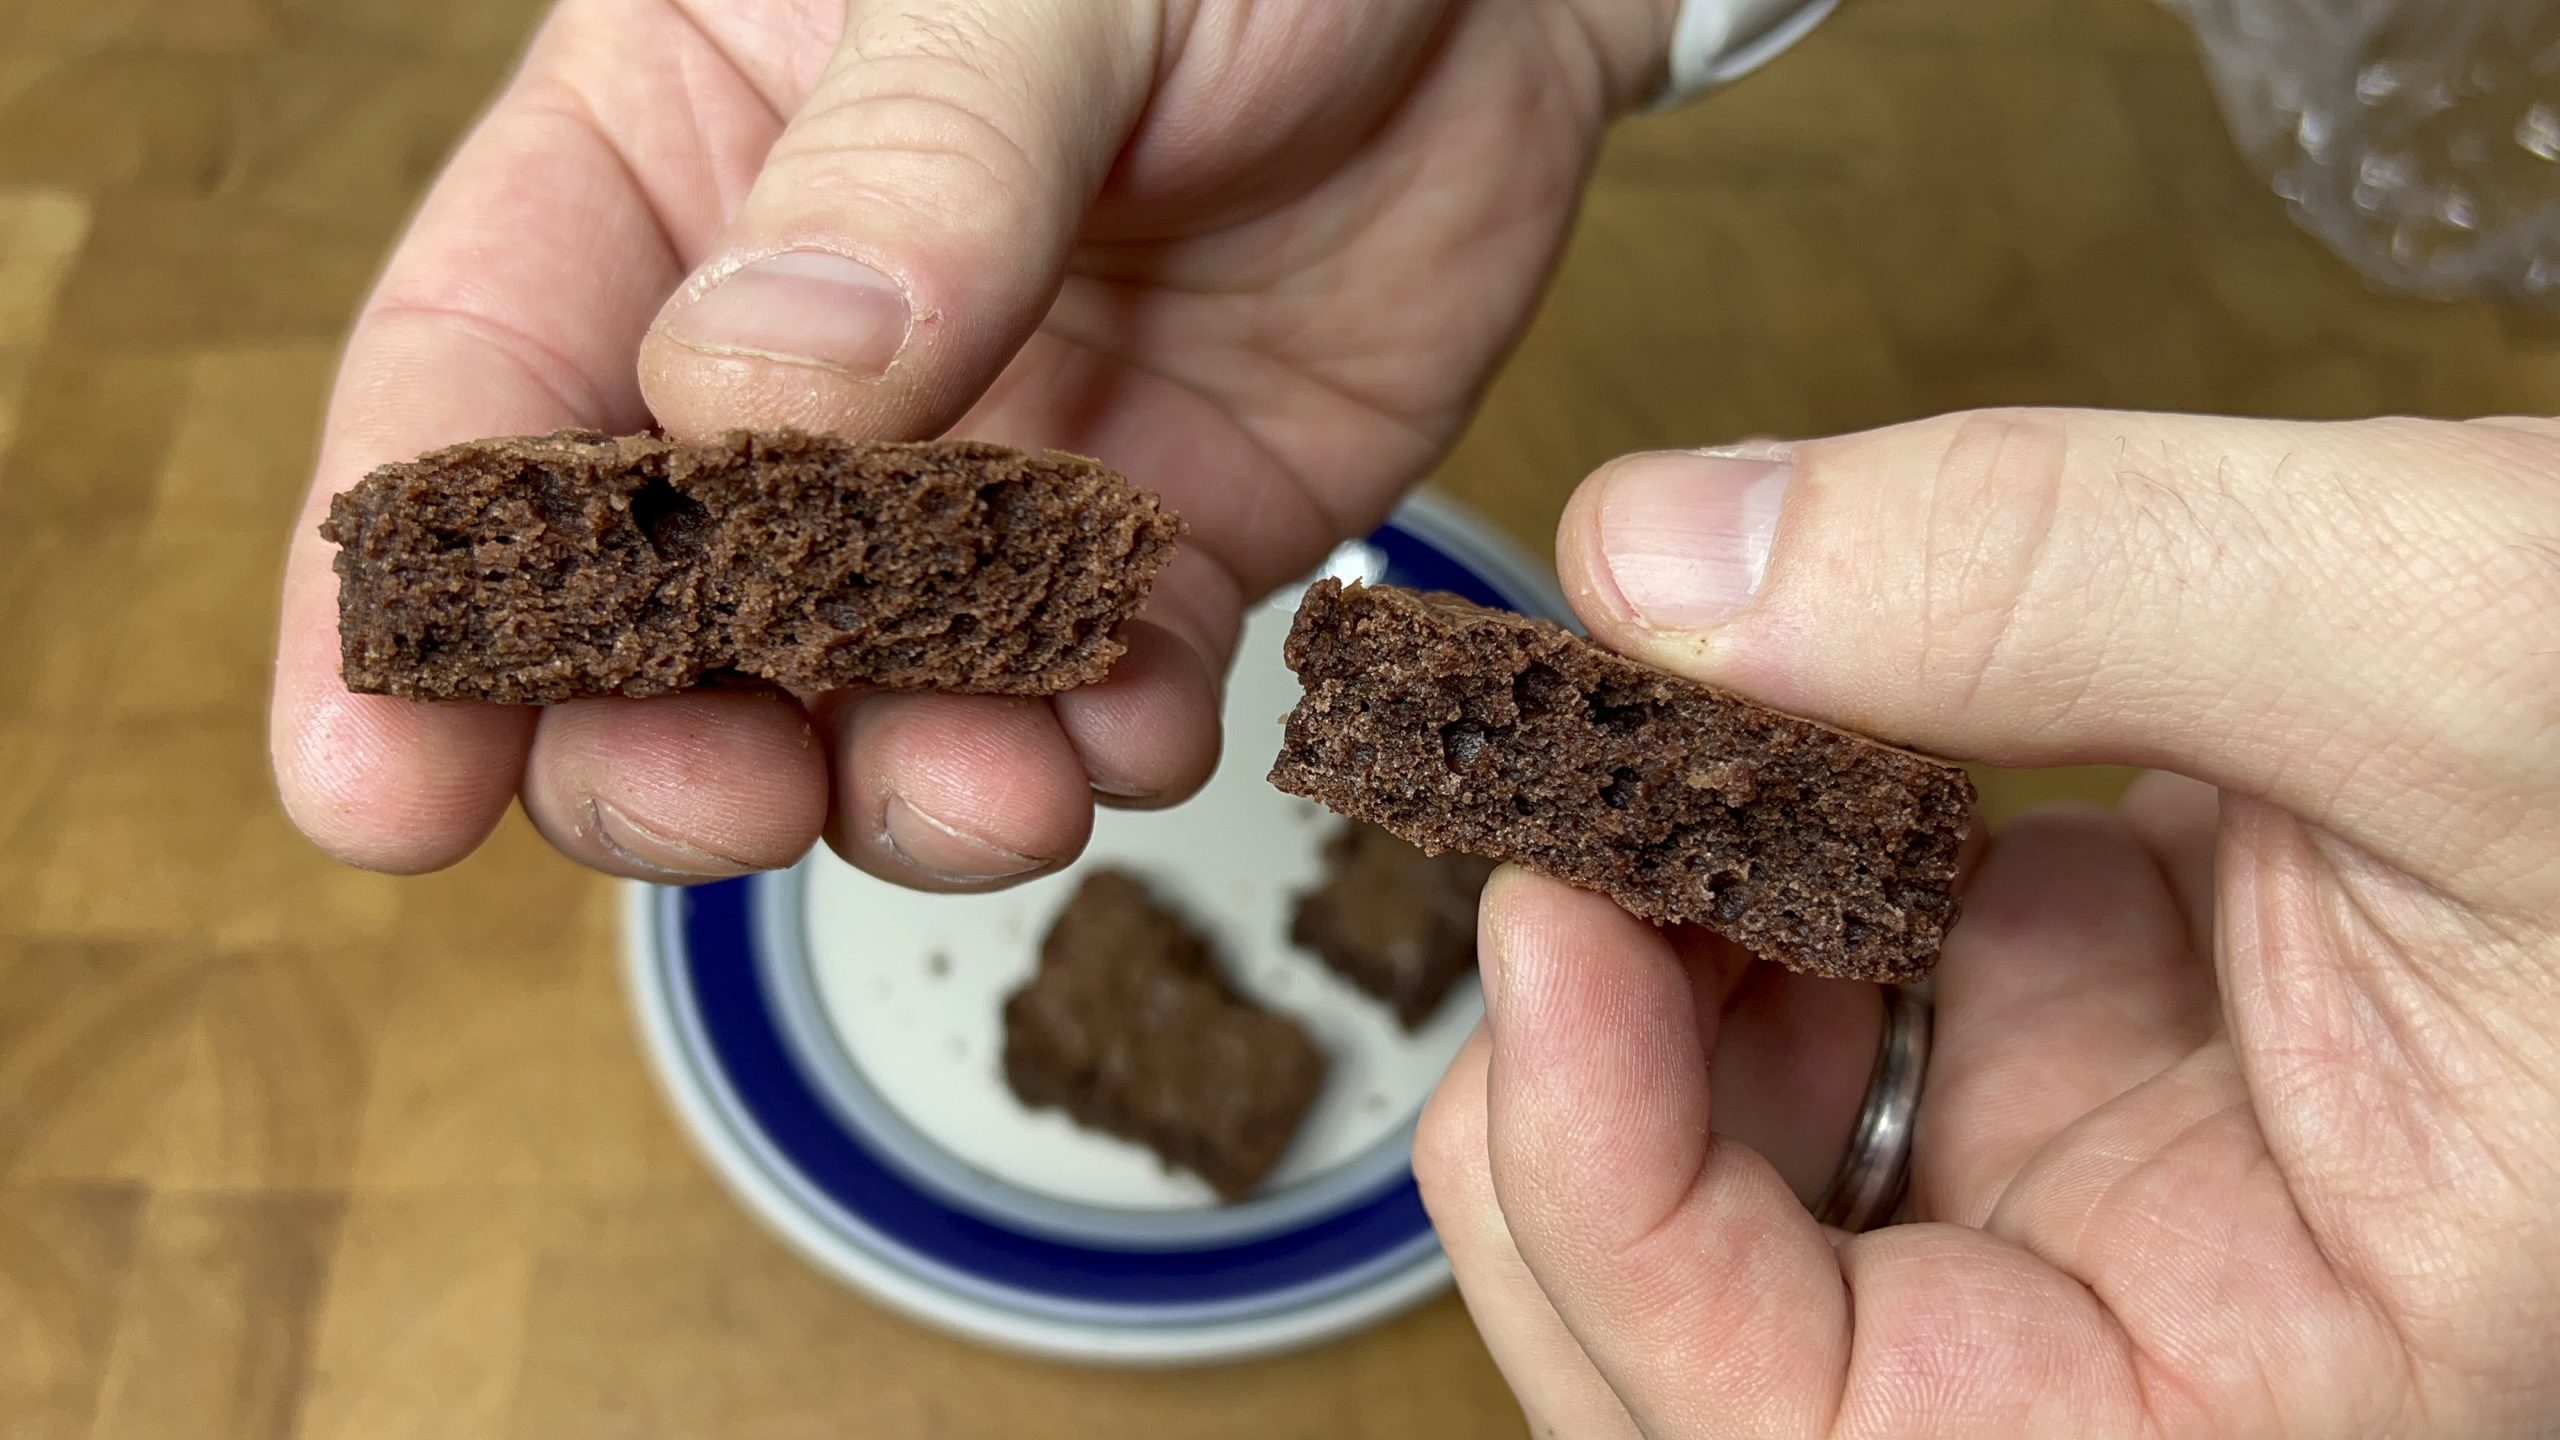 hands holding a fresh brownie on the left and a frozen and defrosted brownie on the right